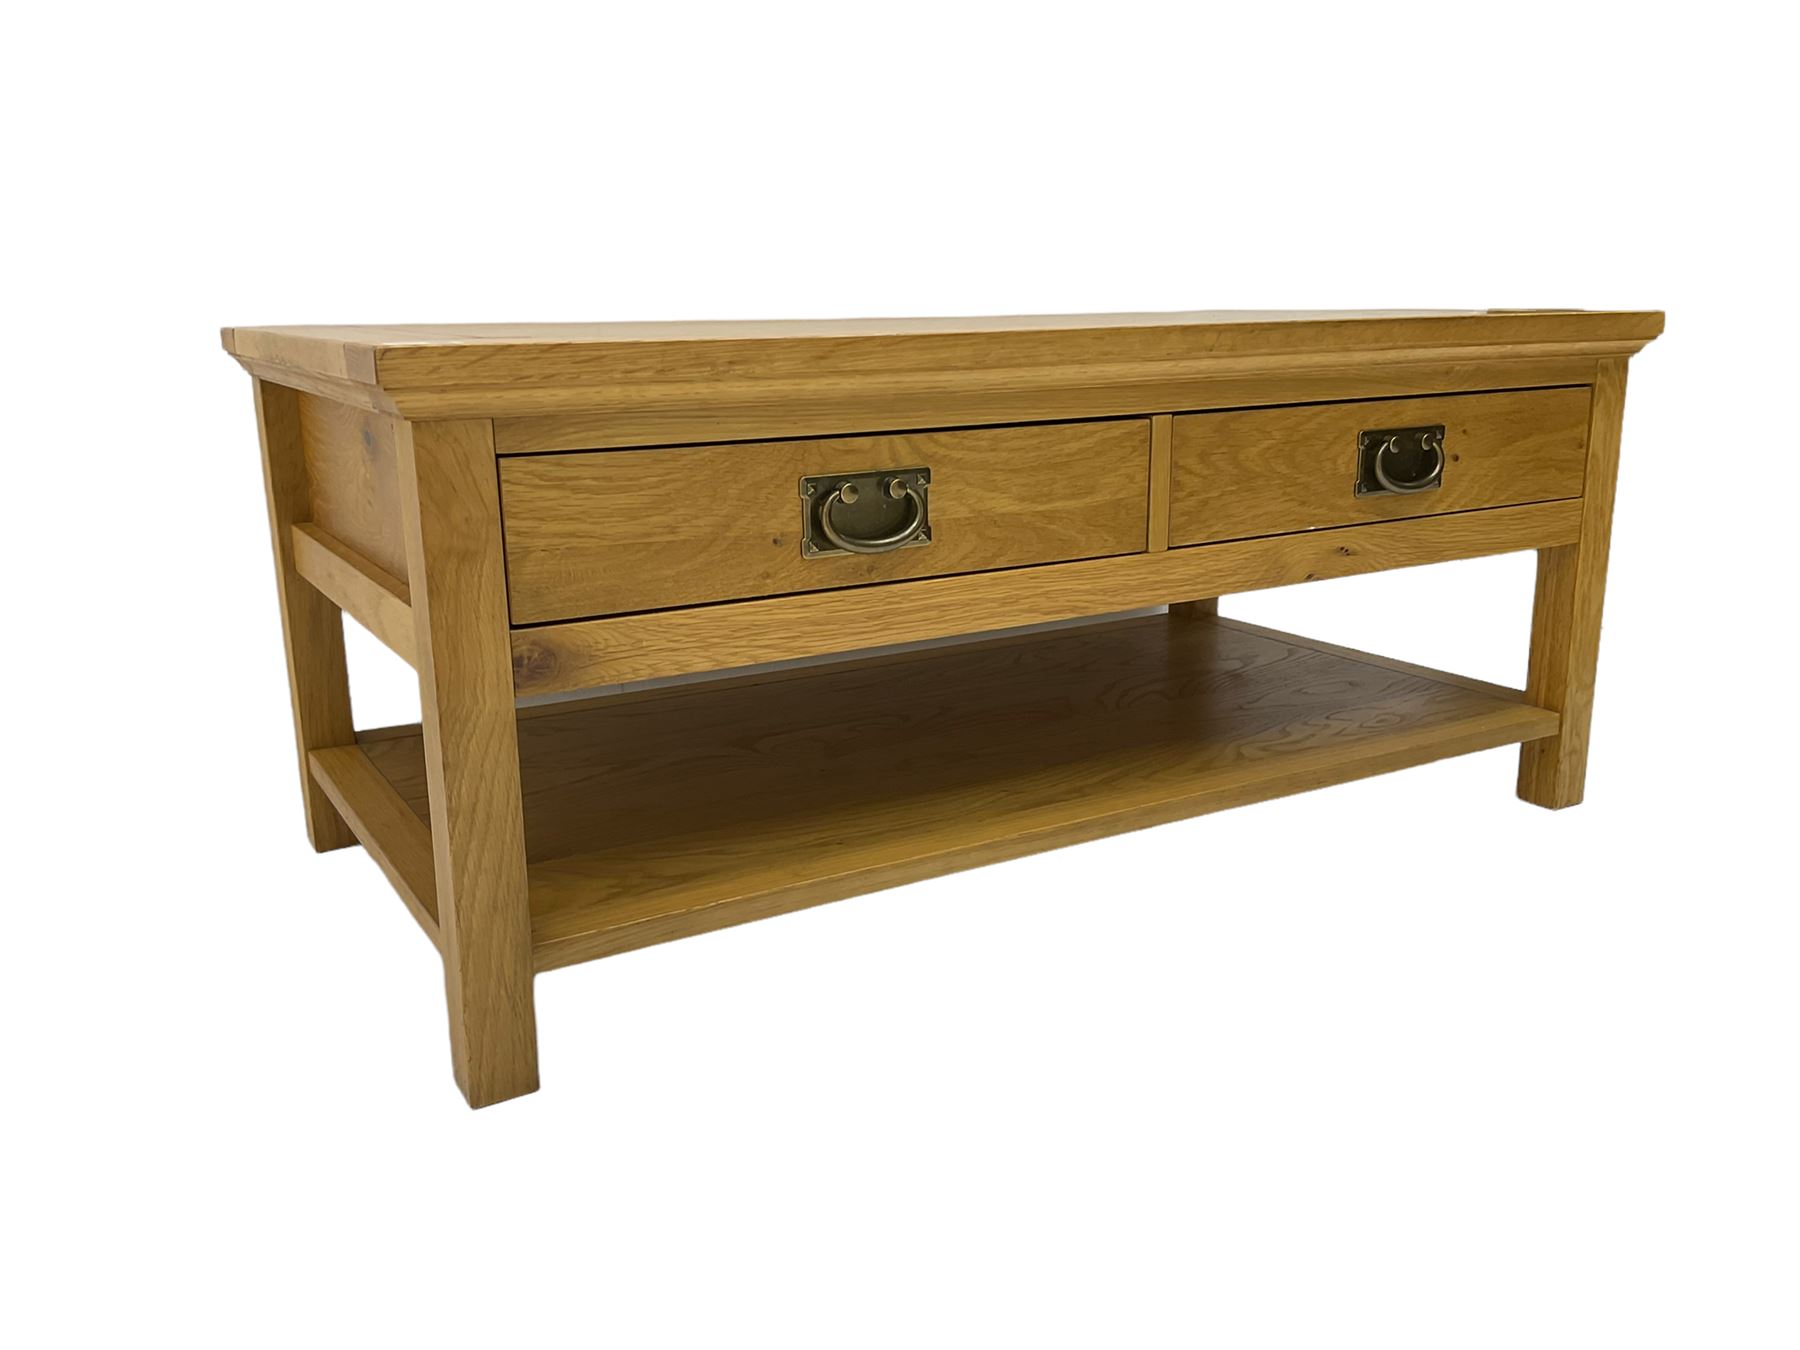 Light oak coffee table fitted with two drawers and undertier - Image 2 of 7